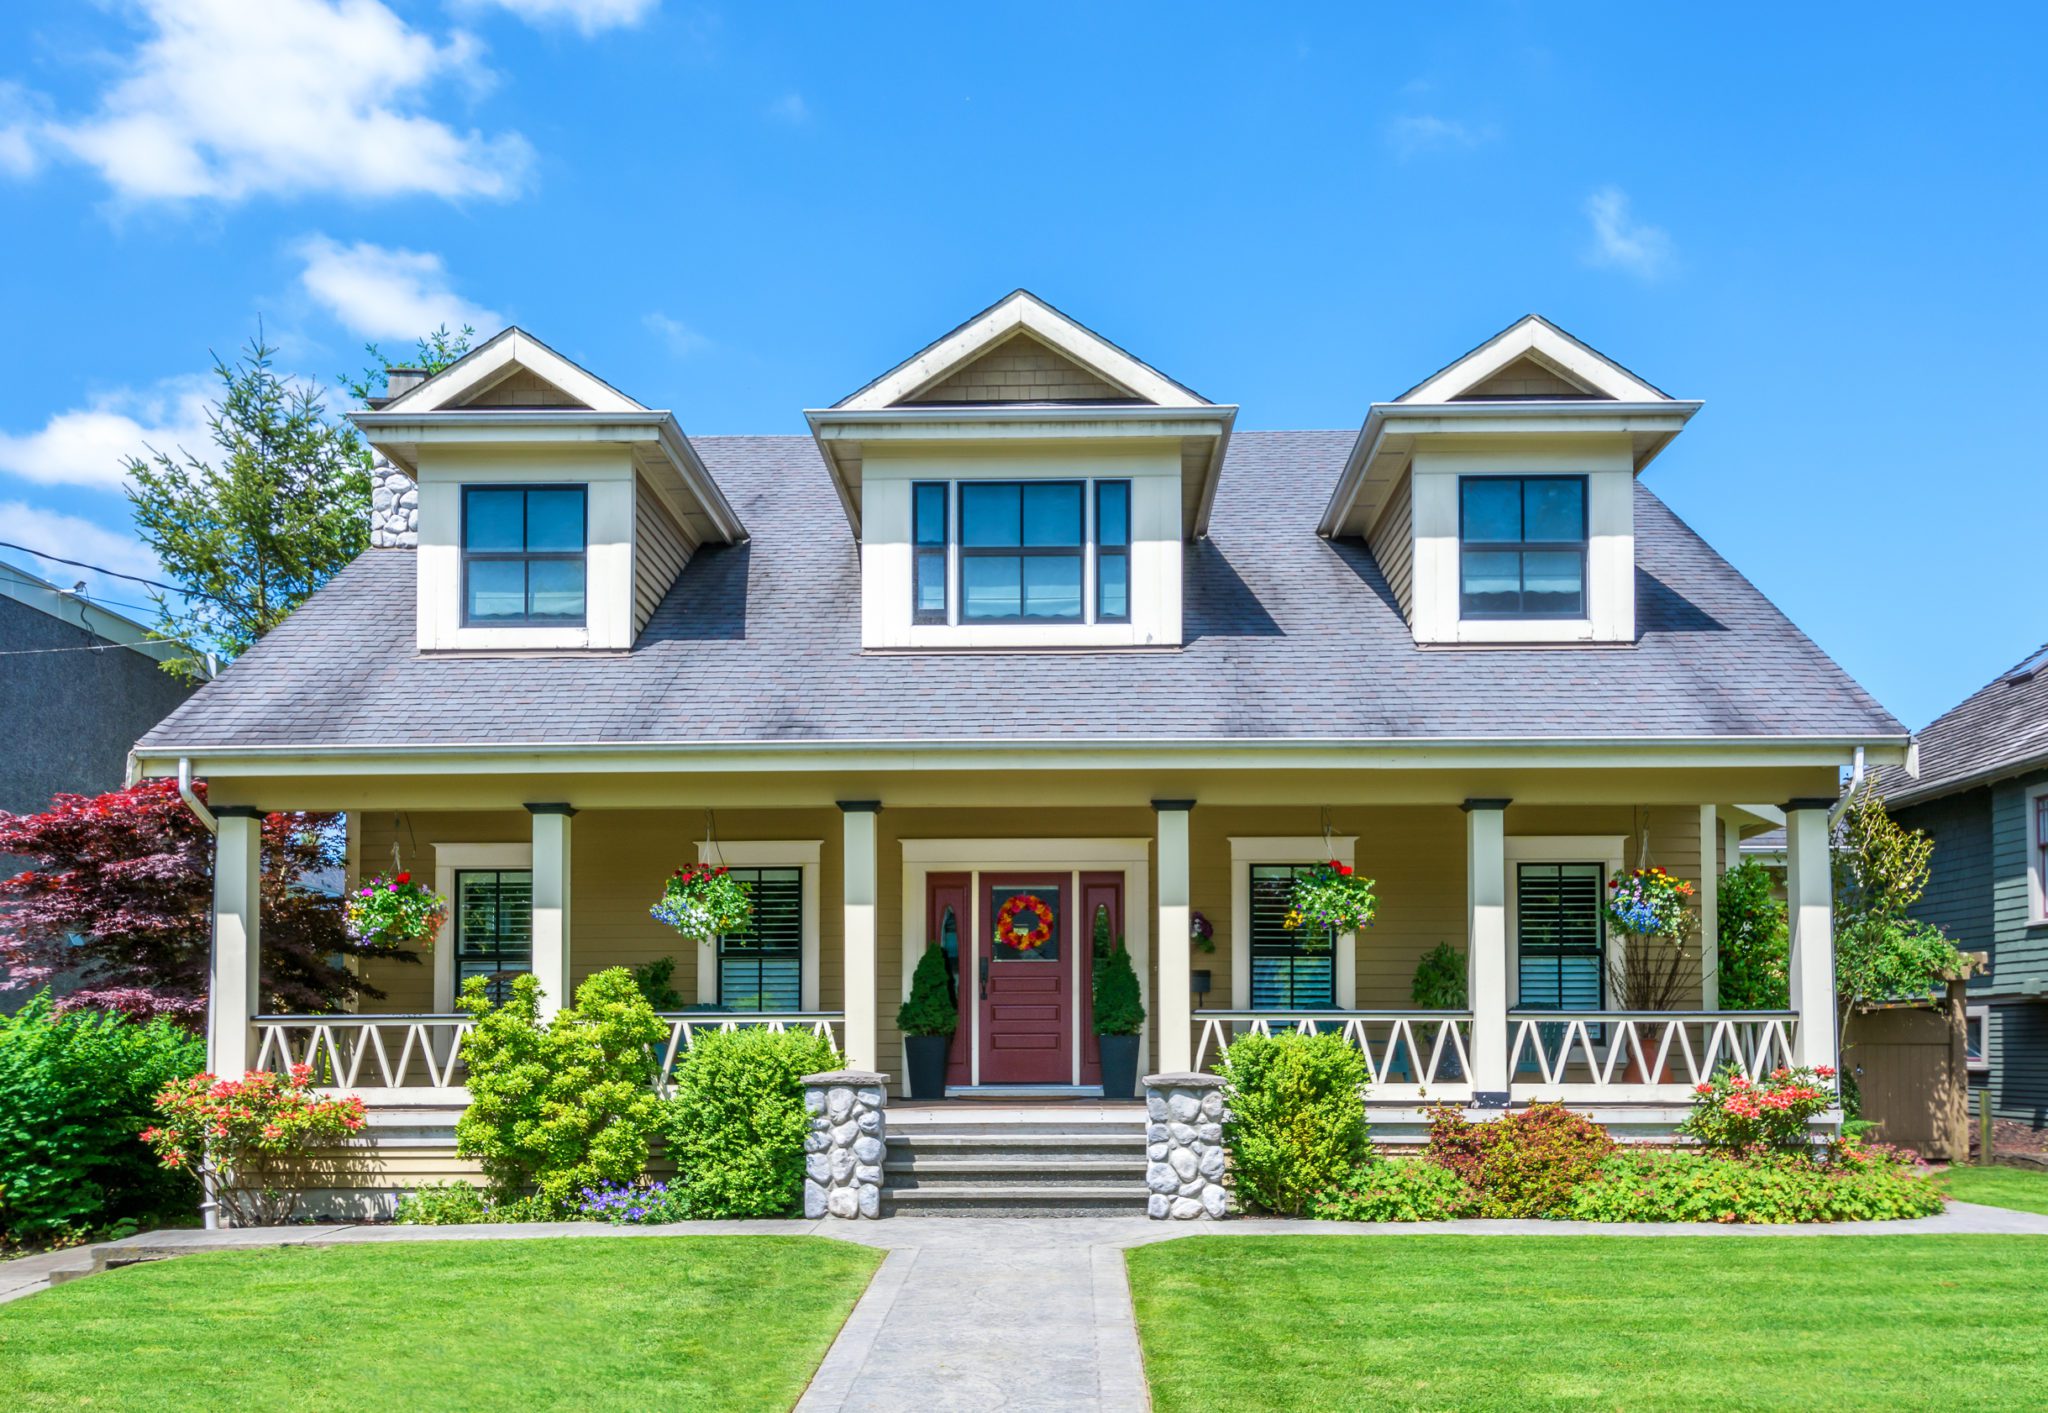 4 tips for preparing for an open house